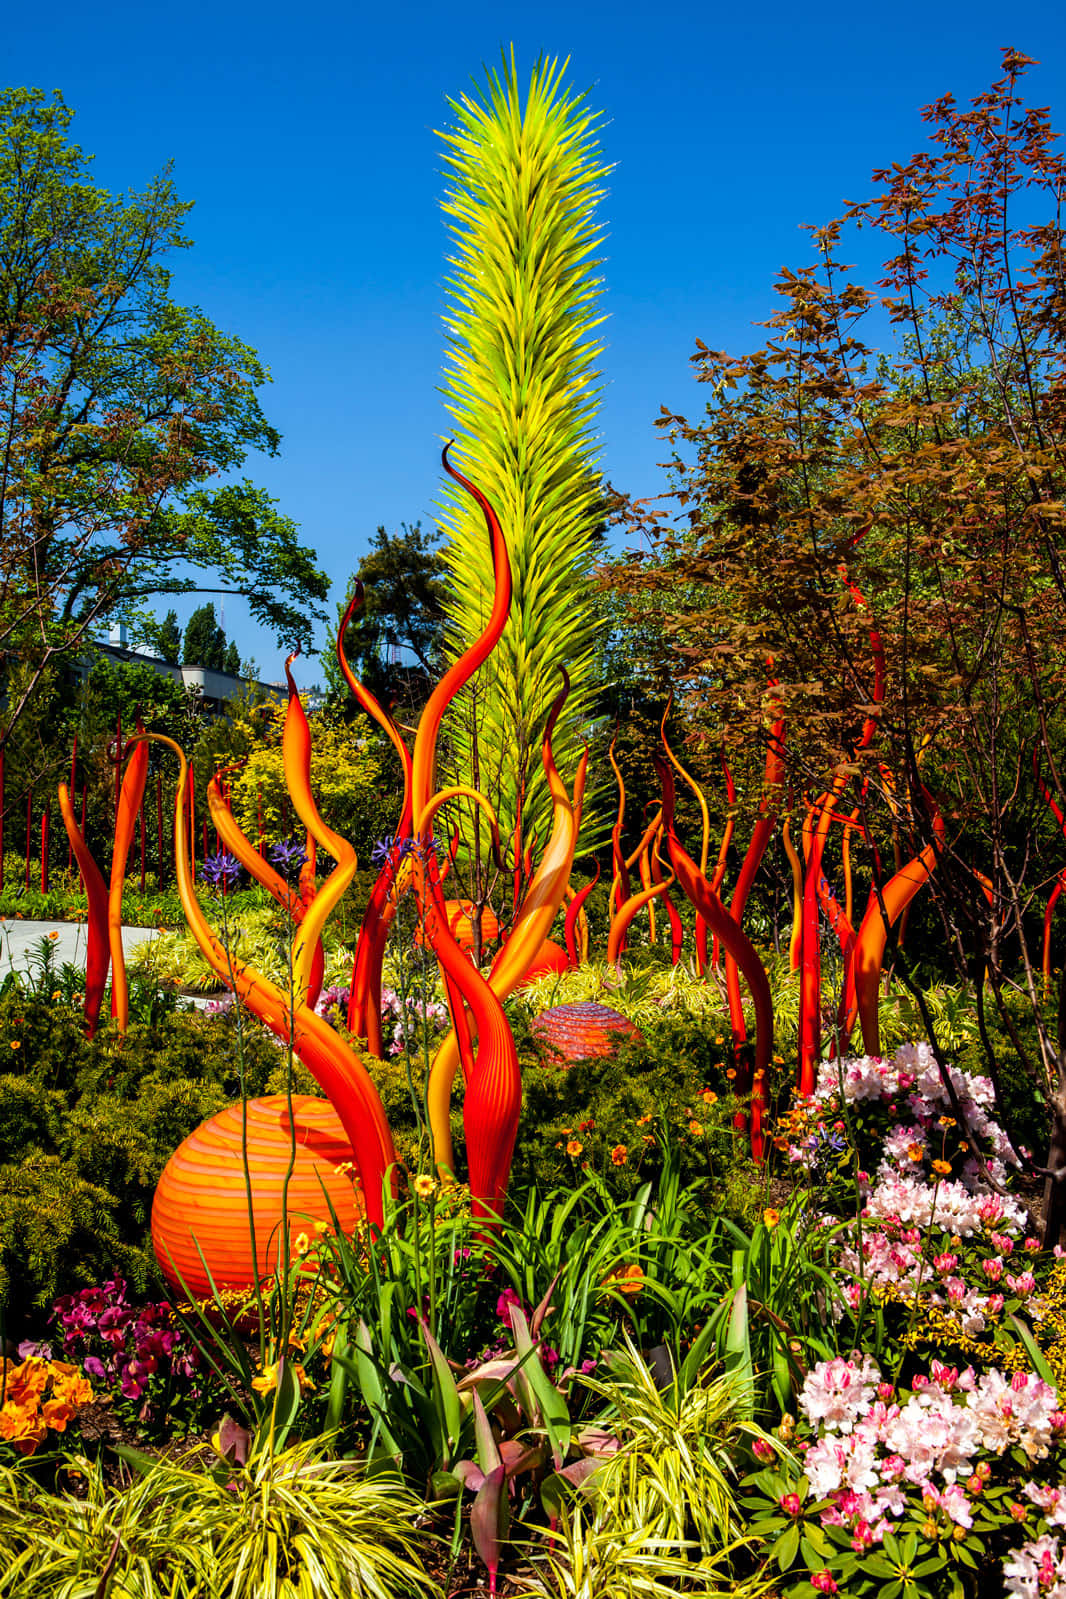 Chihuly Glass Sculptures Garden Display Wallpaper